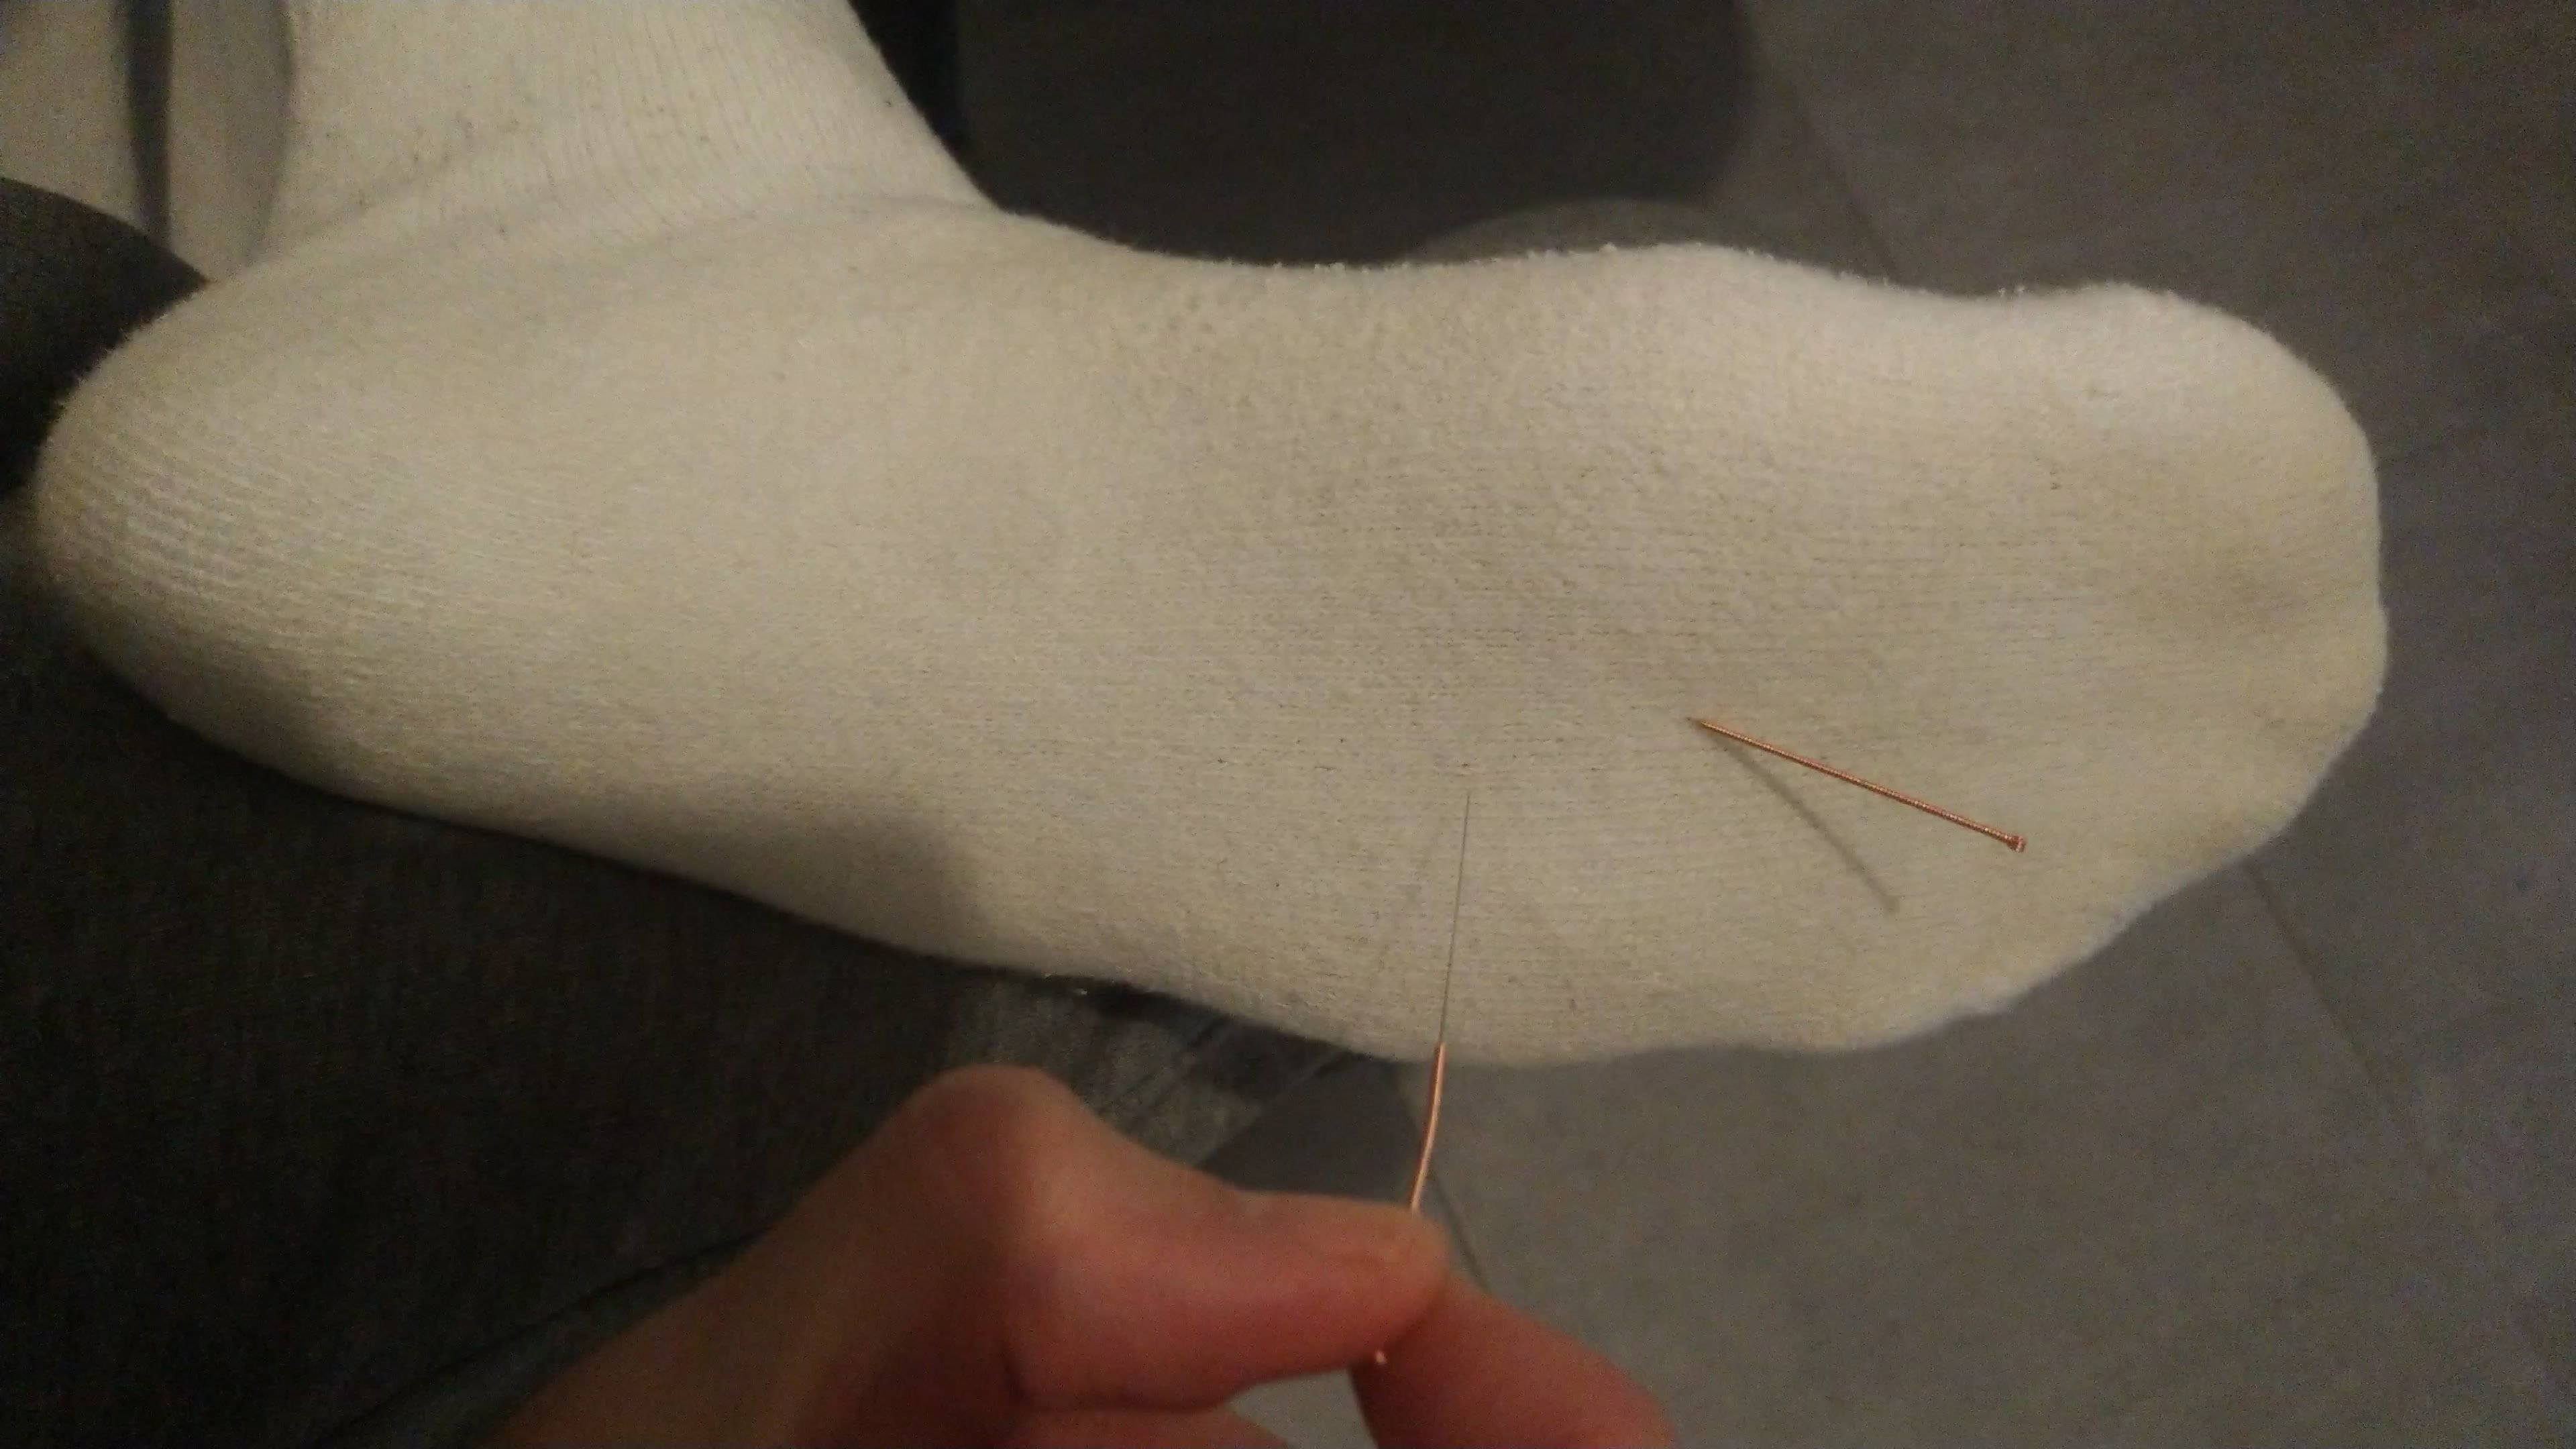 Relieving foot of 2 long needles